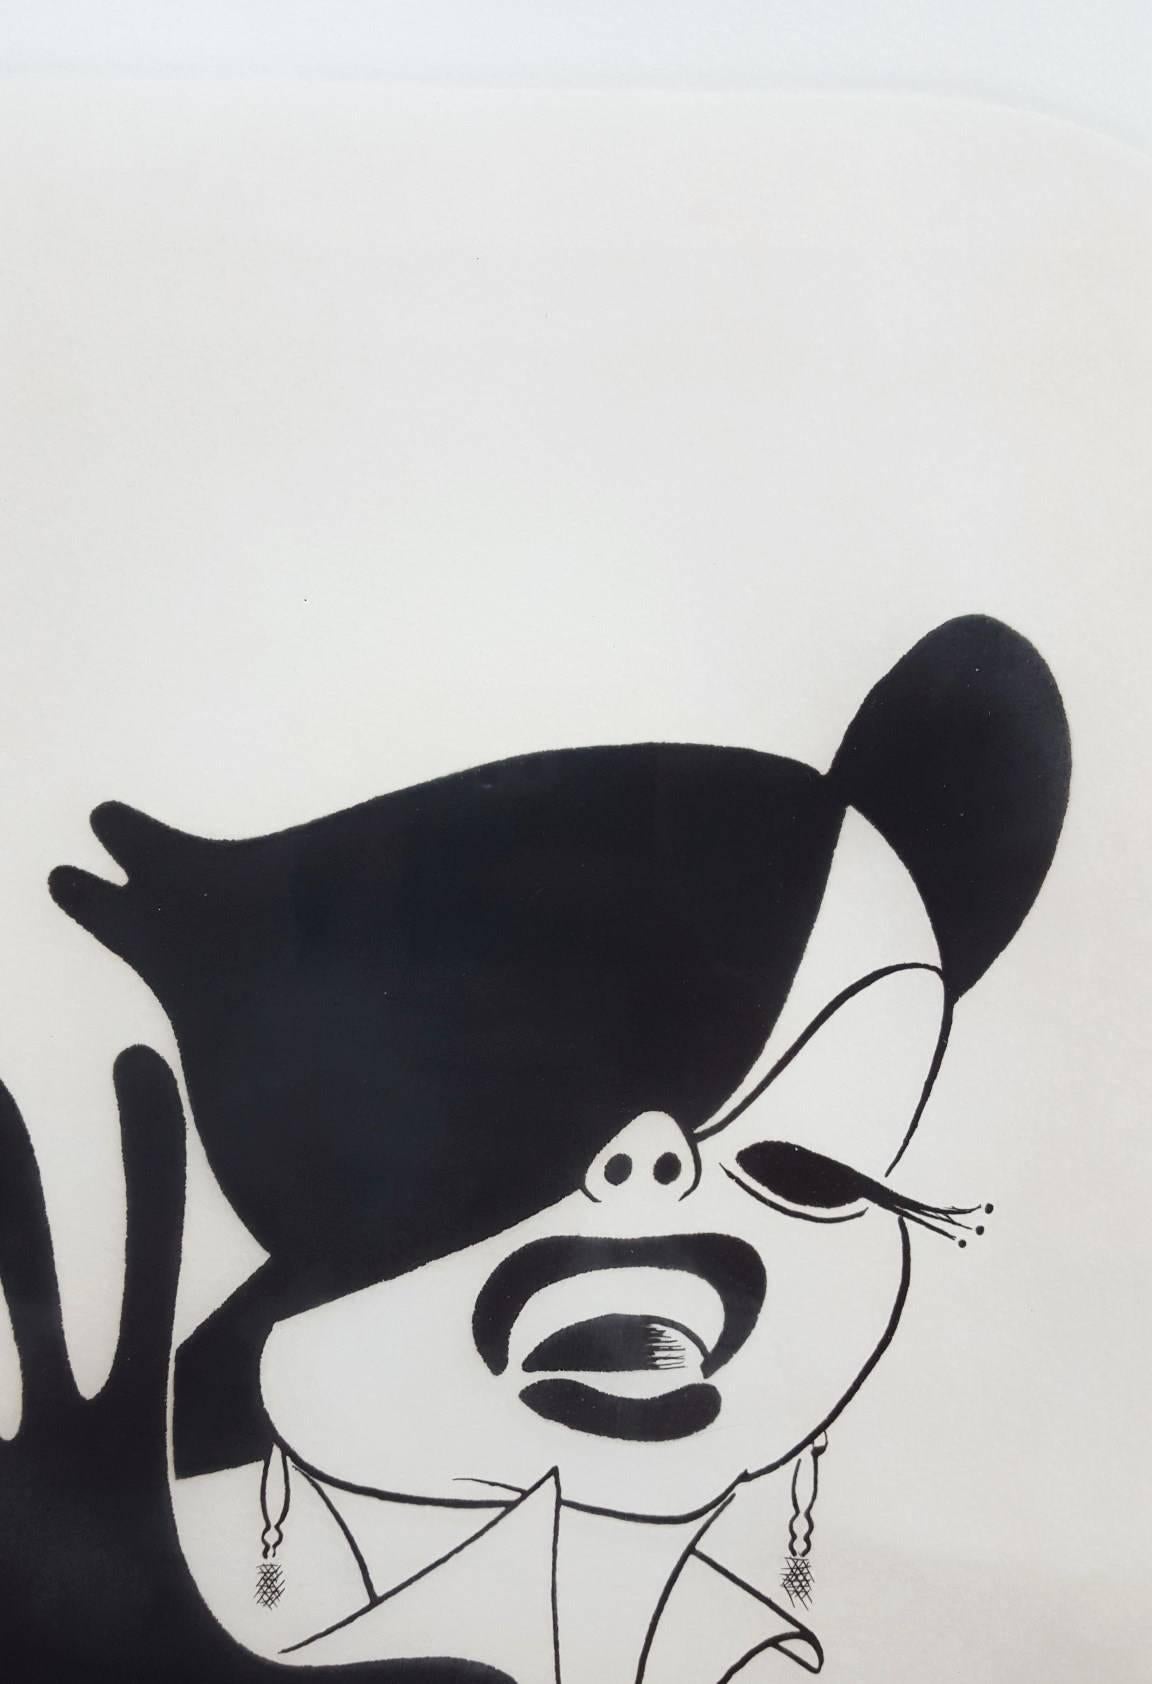 An original signed etching on Arches paper by American artist Al Hirschfeld (1903-2003) titled 